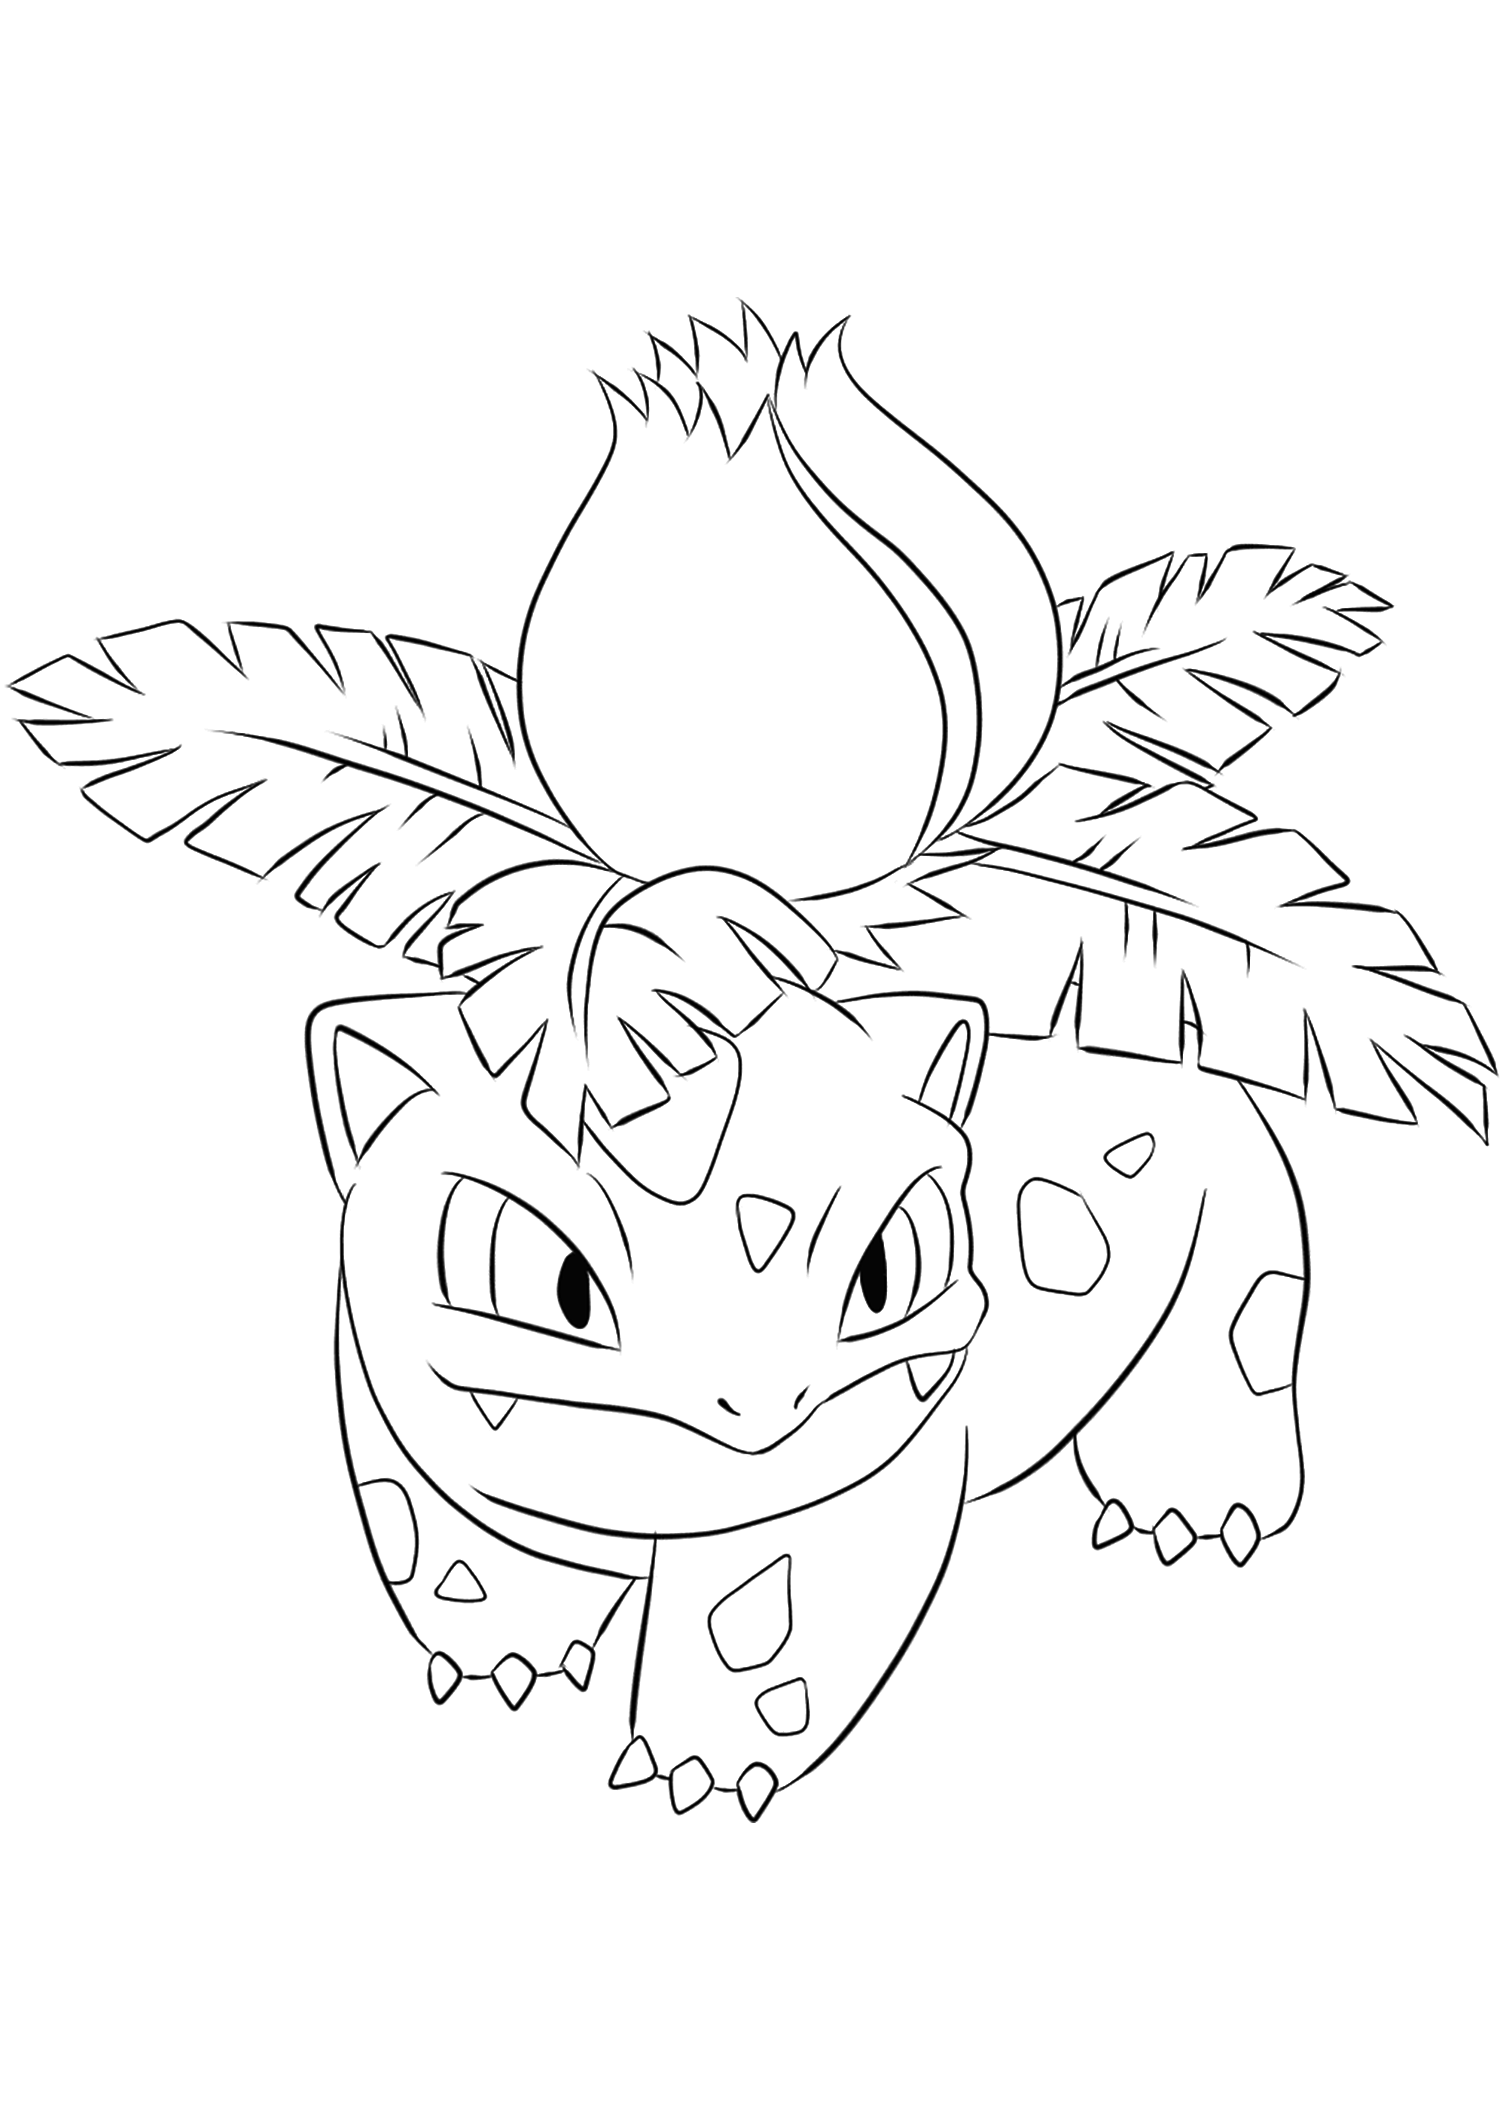 Ivysaur (No.02). Ivysaur Coloring page, Generation I Pokemon of type Grass and PoisonOriginal image credit: Pokemon linearts by Lilly Gerbil'font-size:smaller;color:gray'>Permission: All rights reserved © Pokemon company and Ken Sugimori.